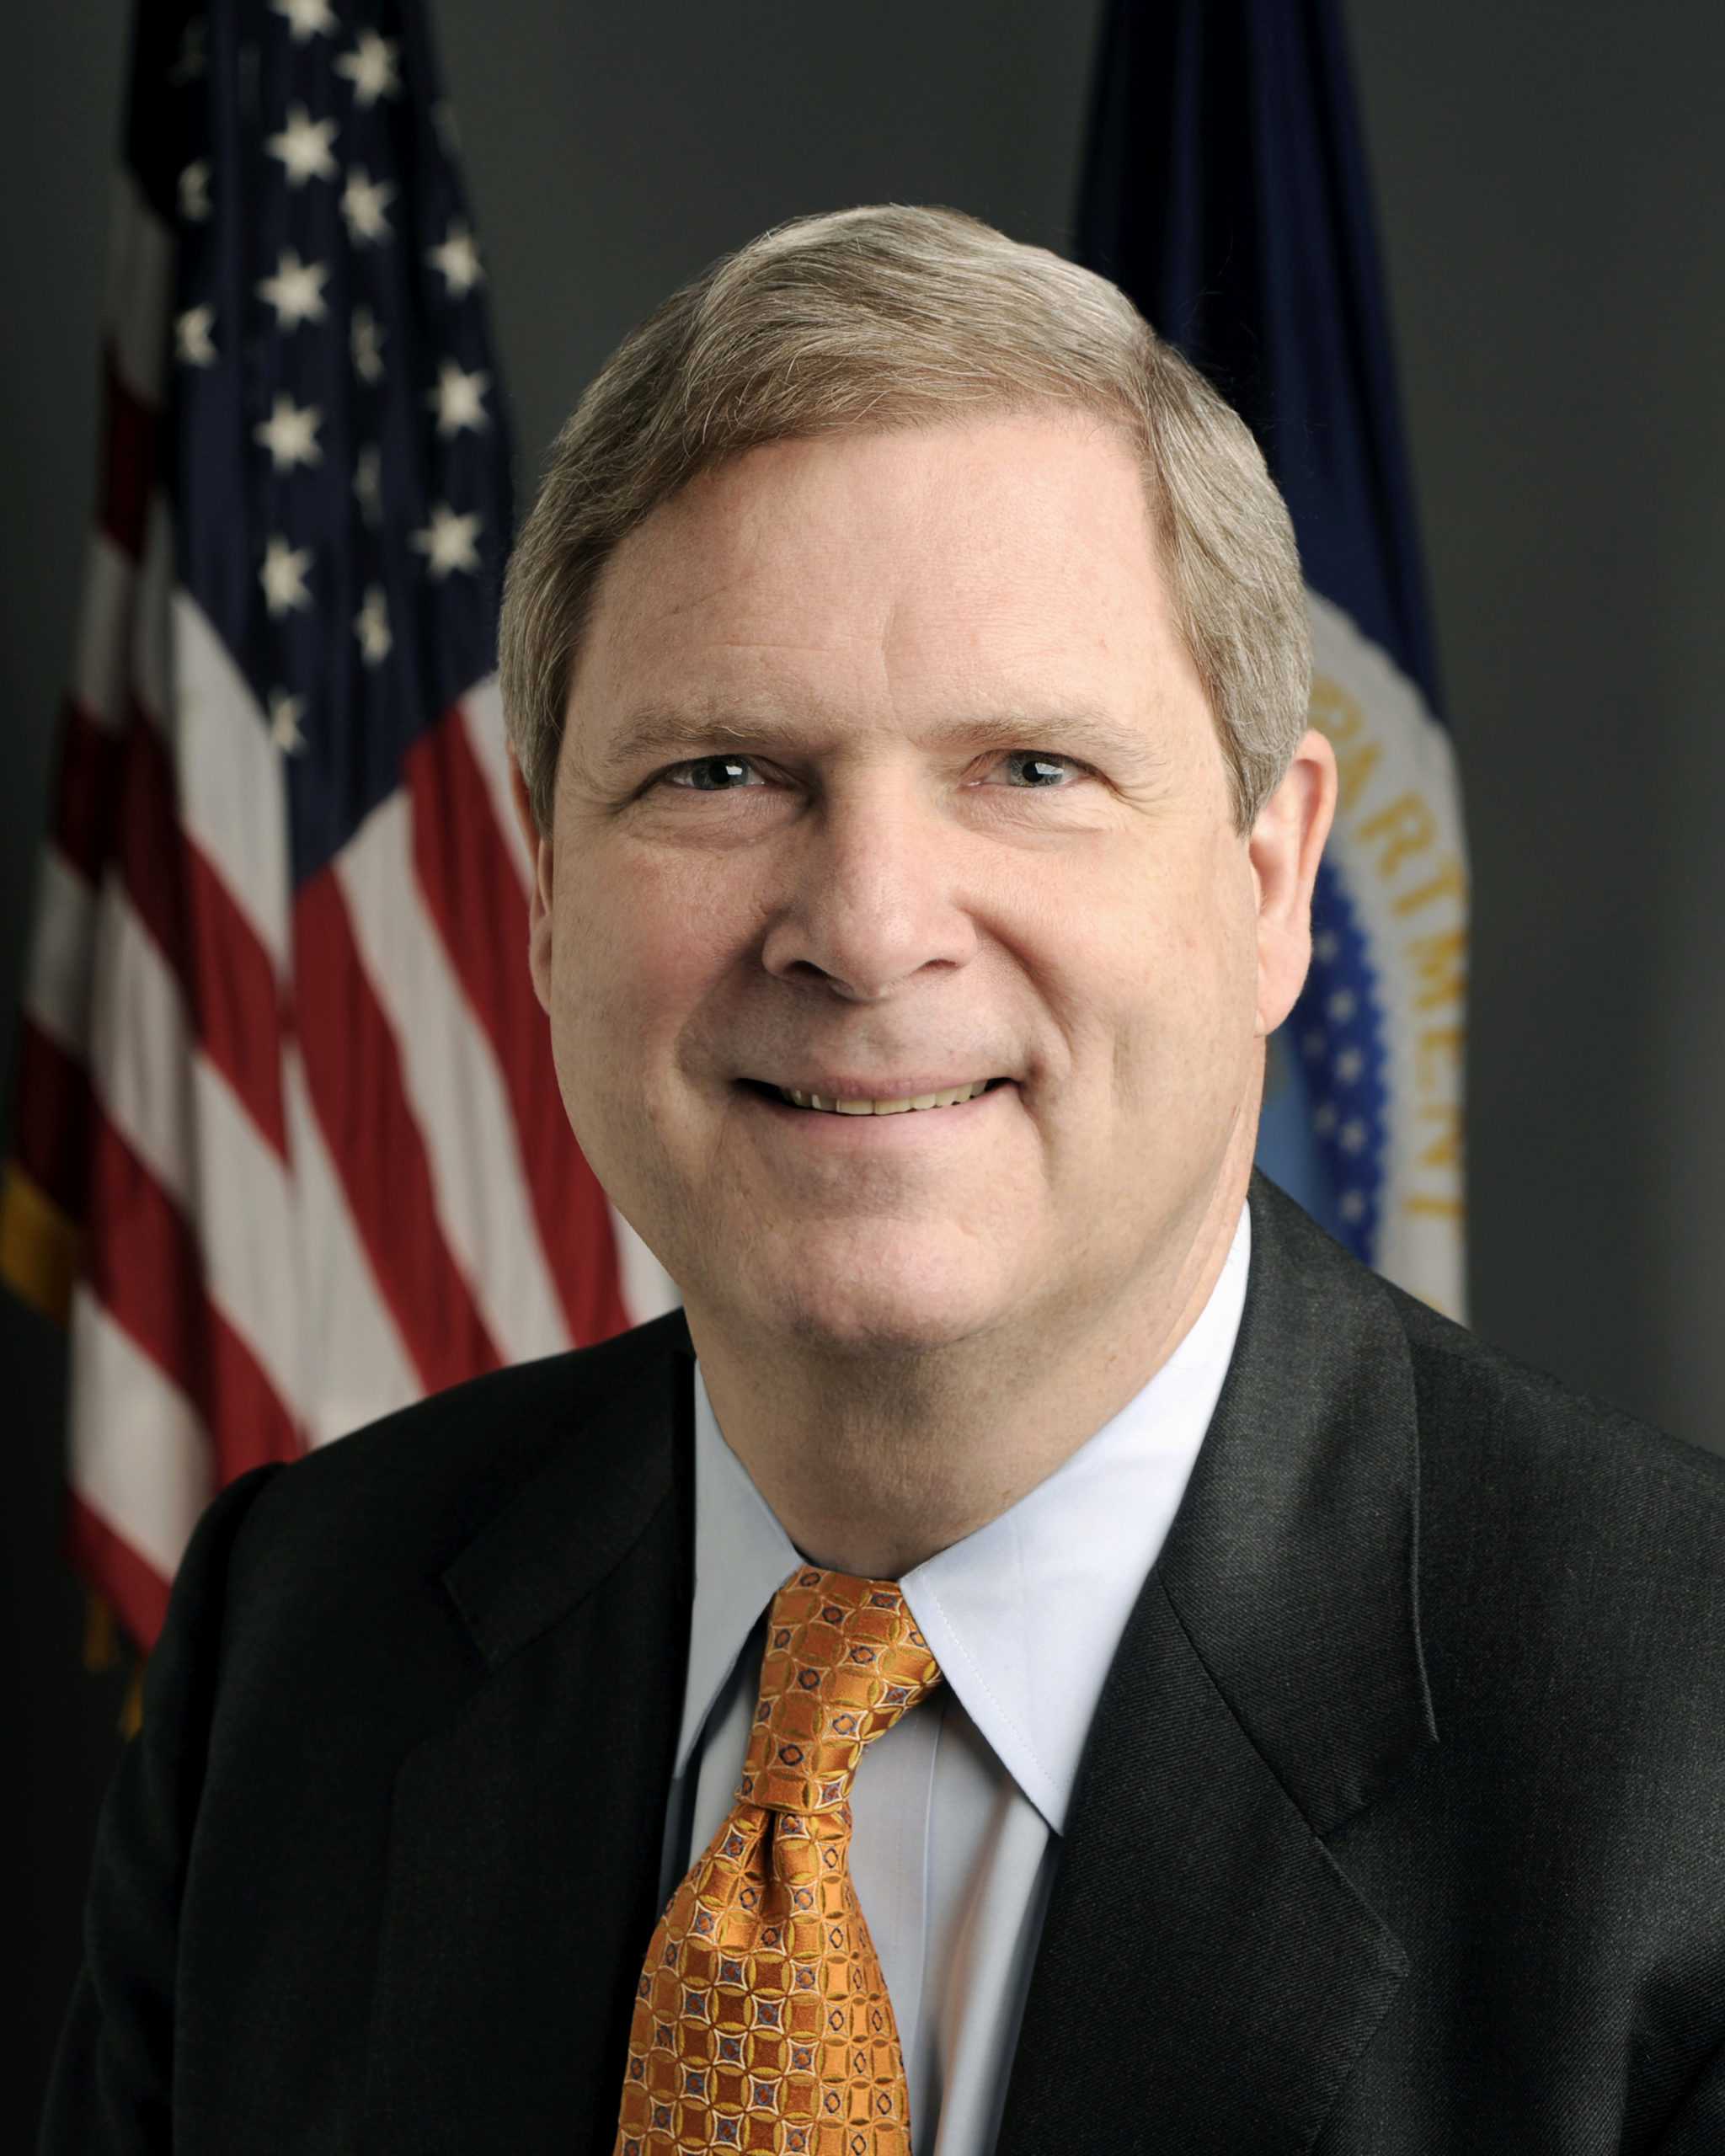 Farmers Union Ready to Work with Secretary Vilsack to Strengthen Farm System